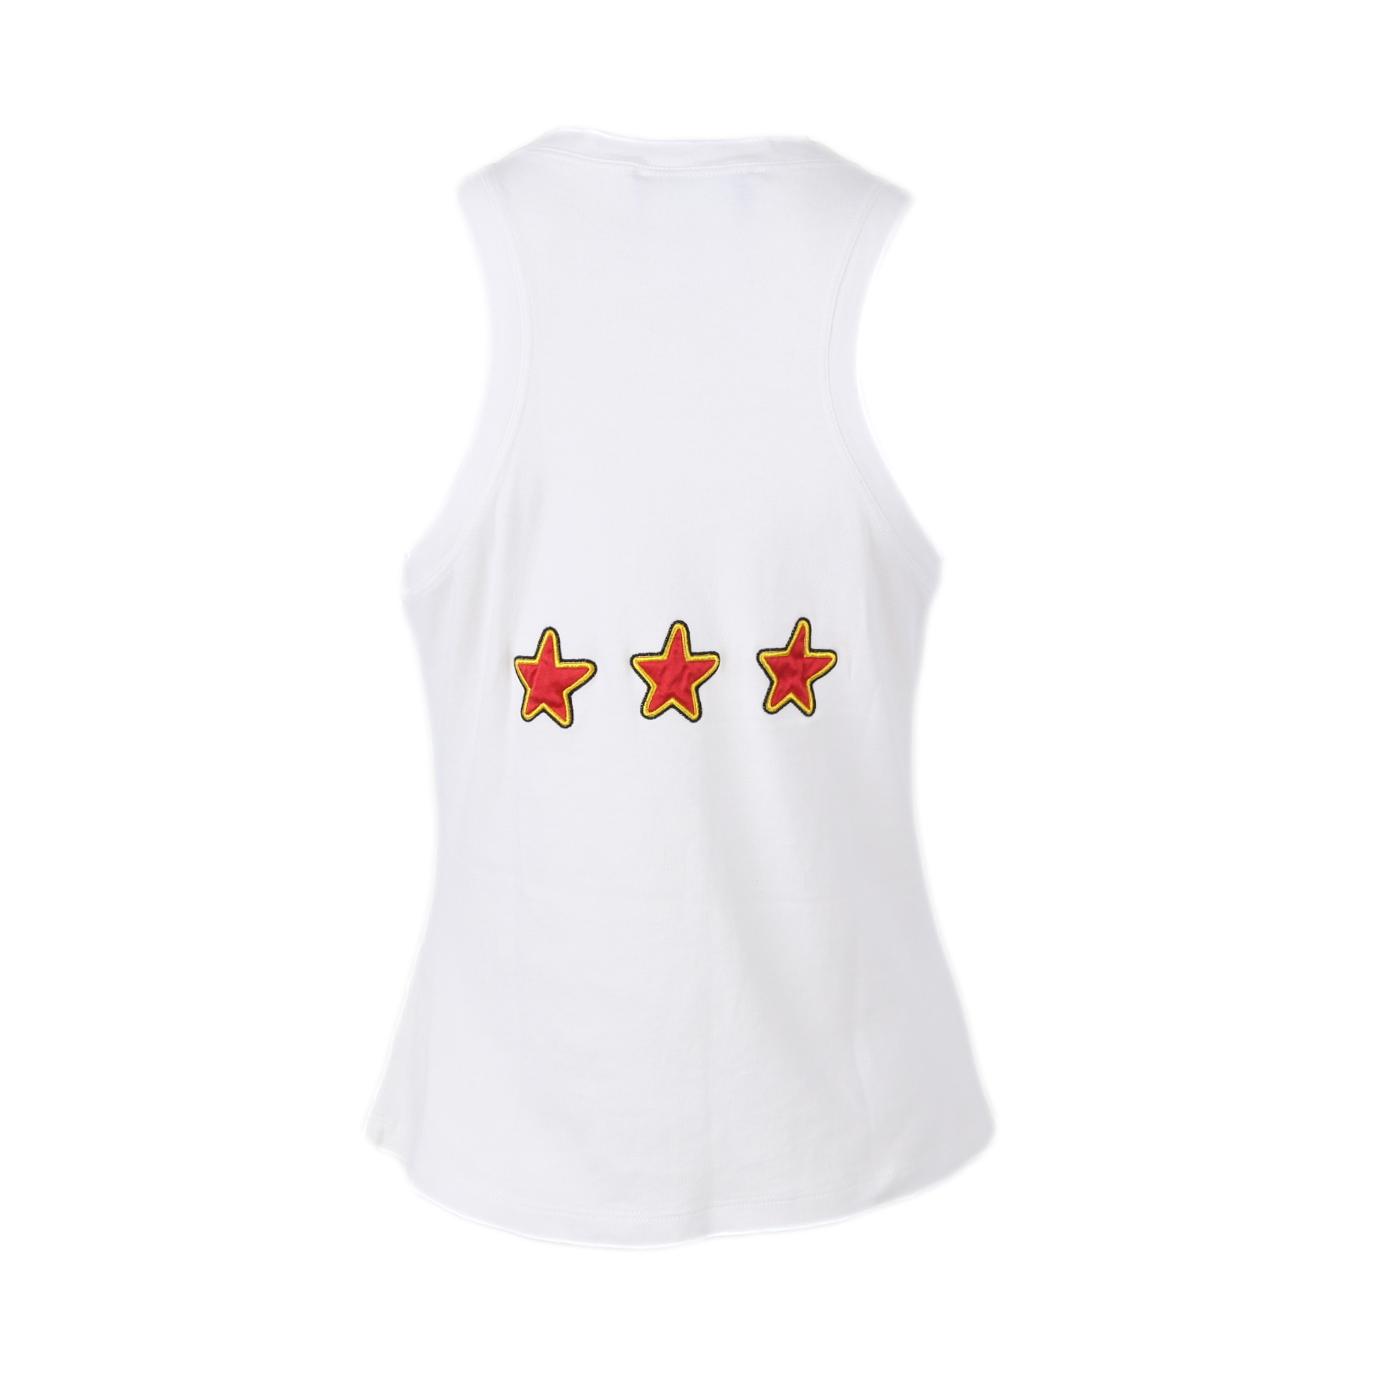 Dior ’Not War’ White Embroidered Tank - Apparel